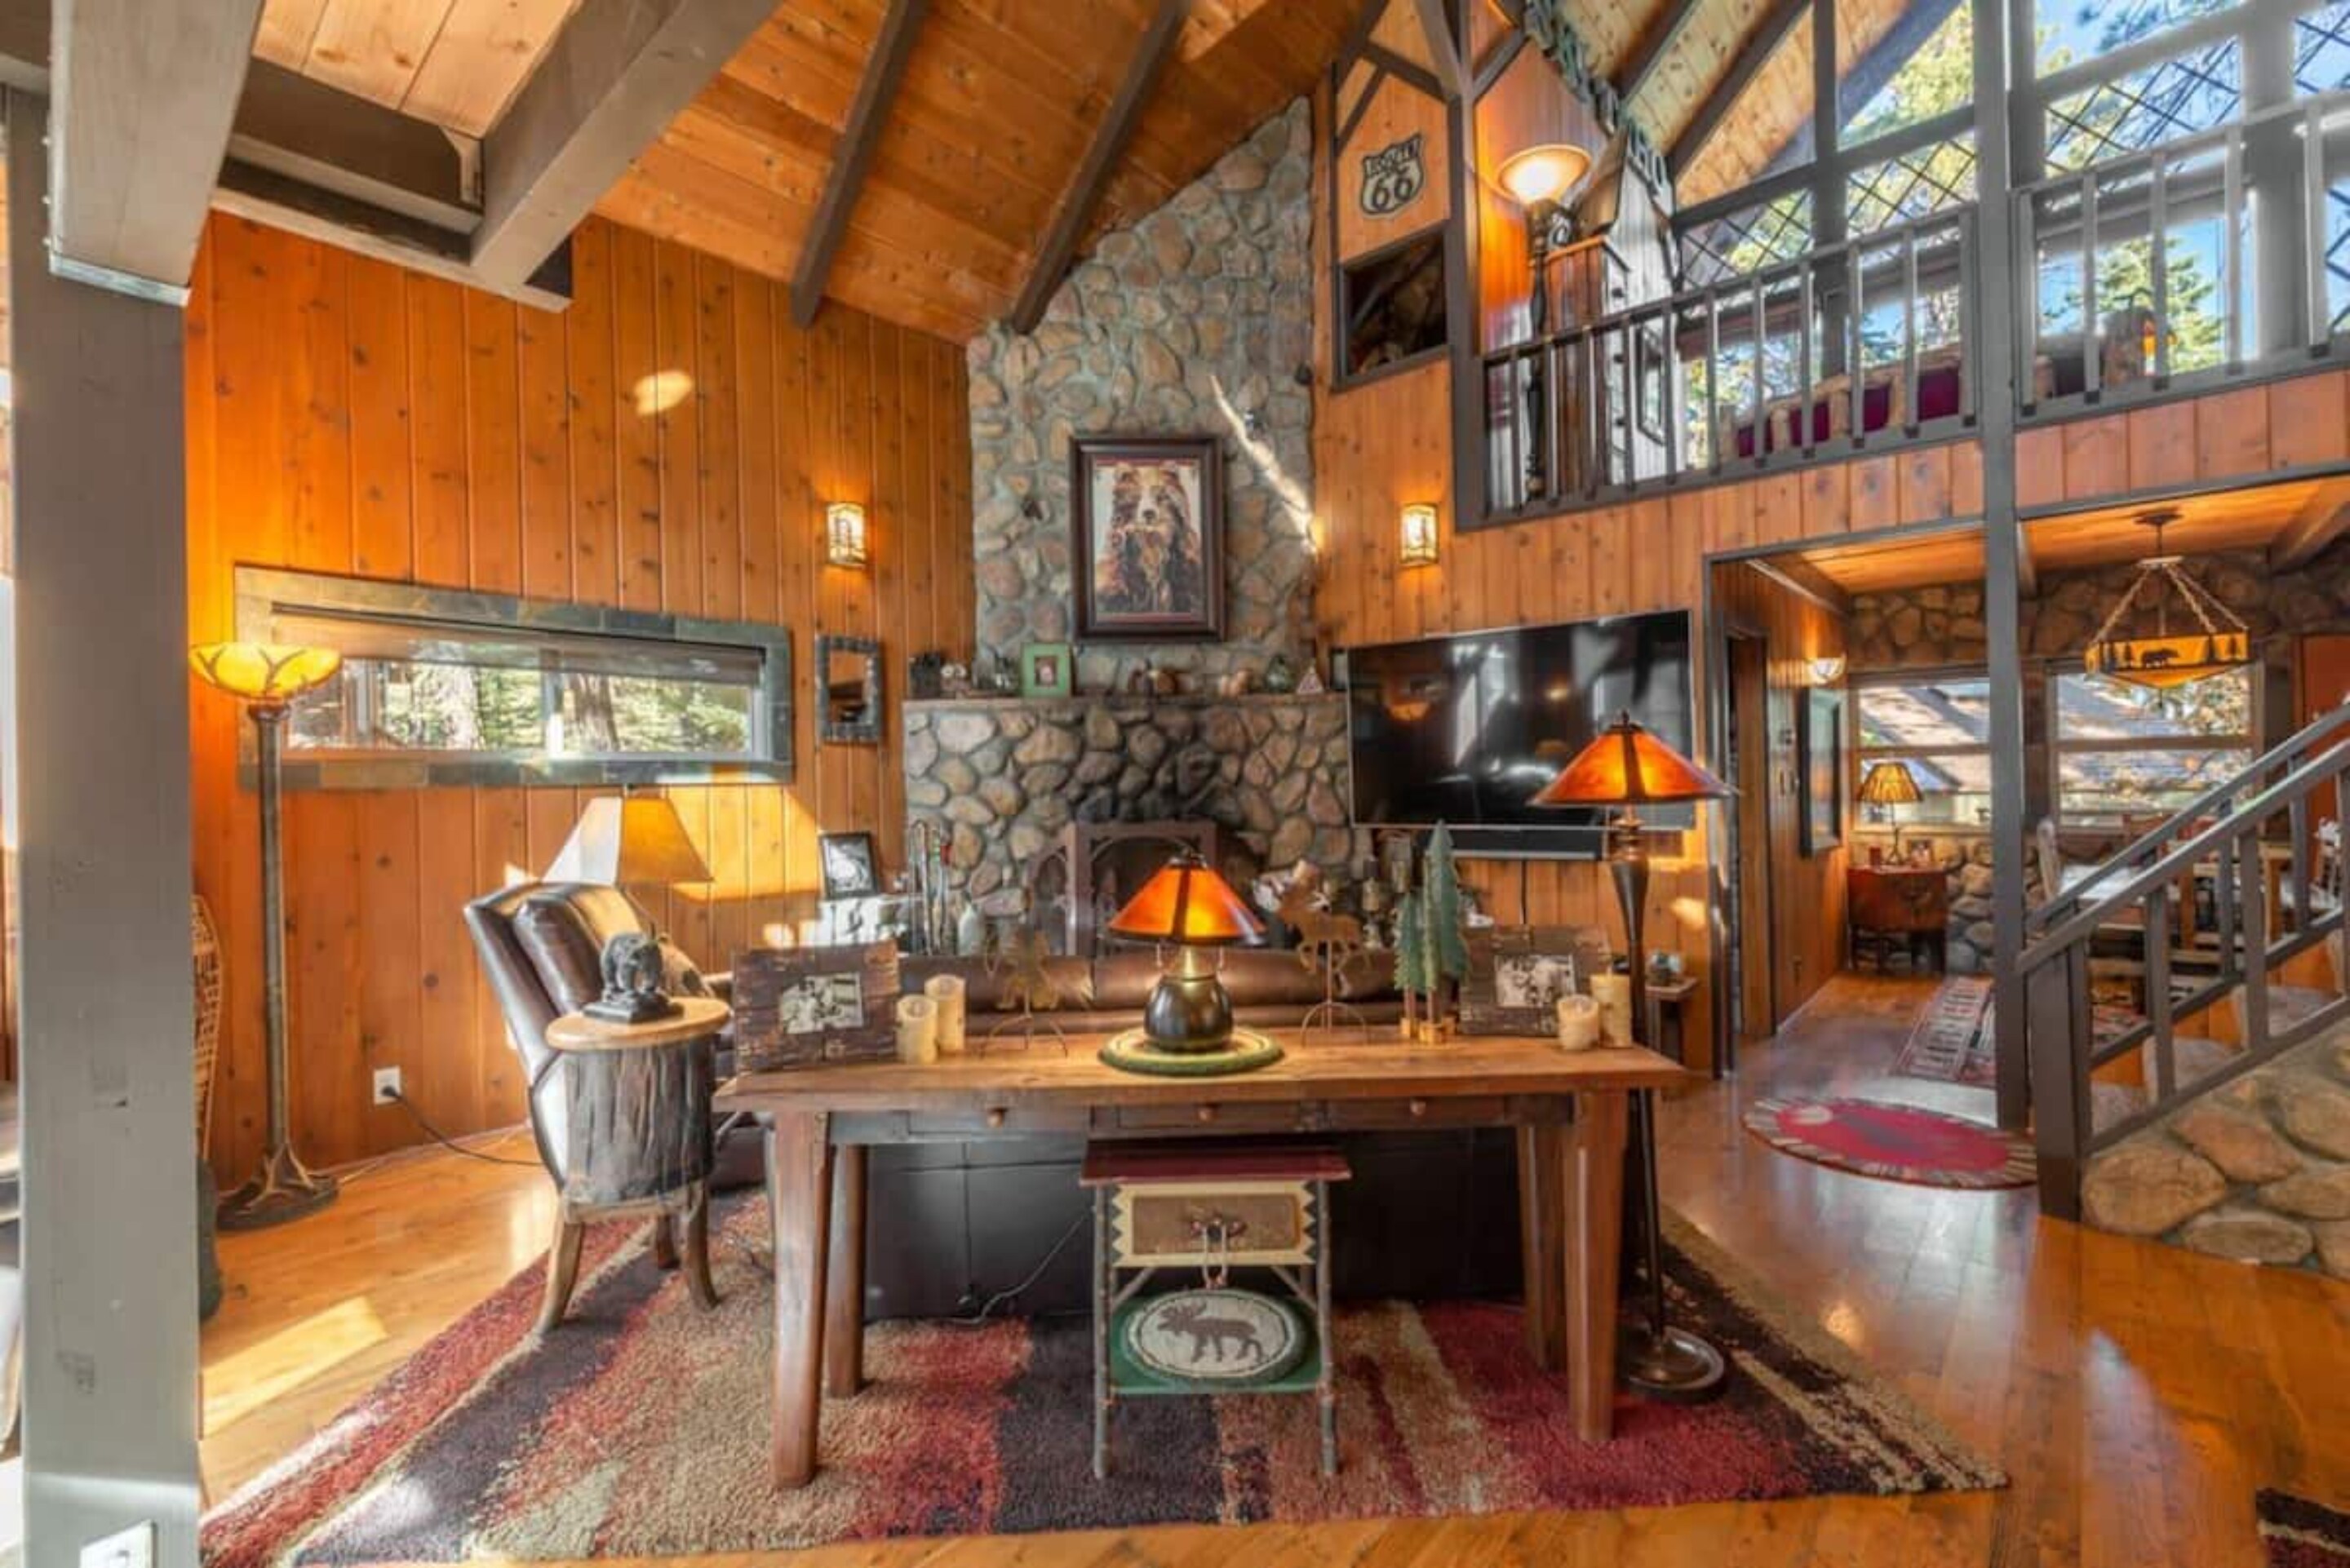 Living area features high ceilings and a traditional rustic feel.